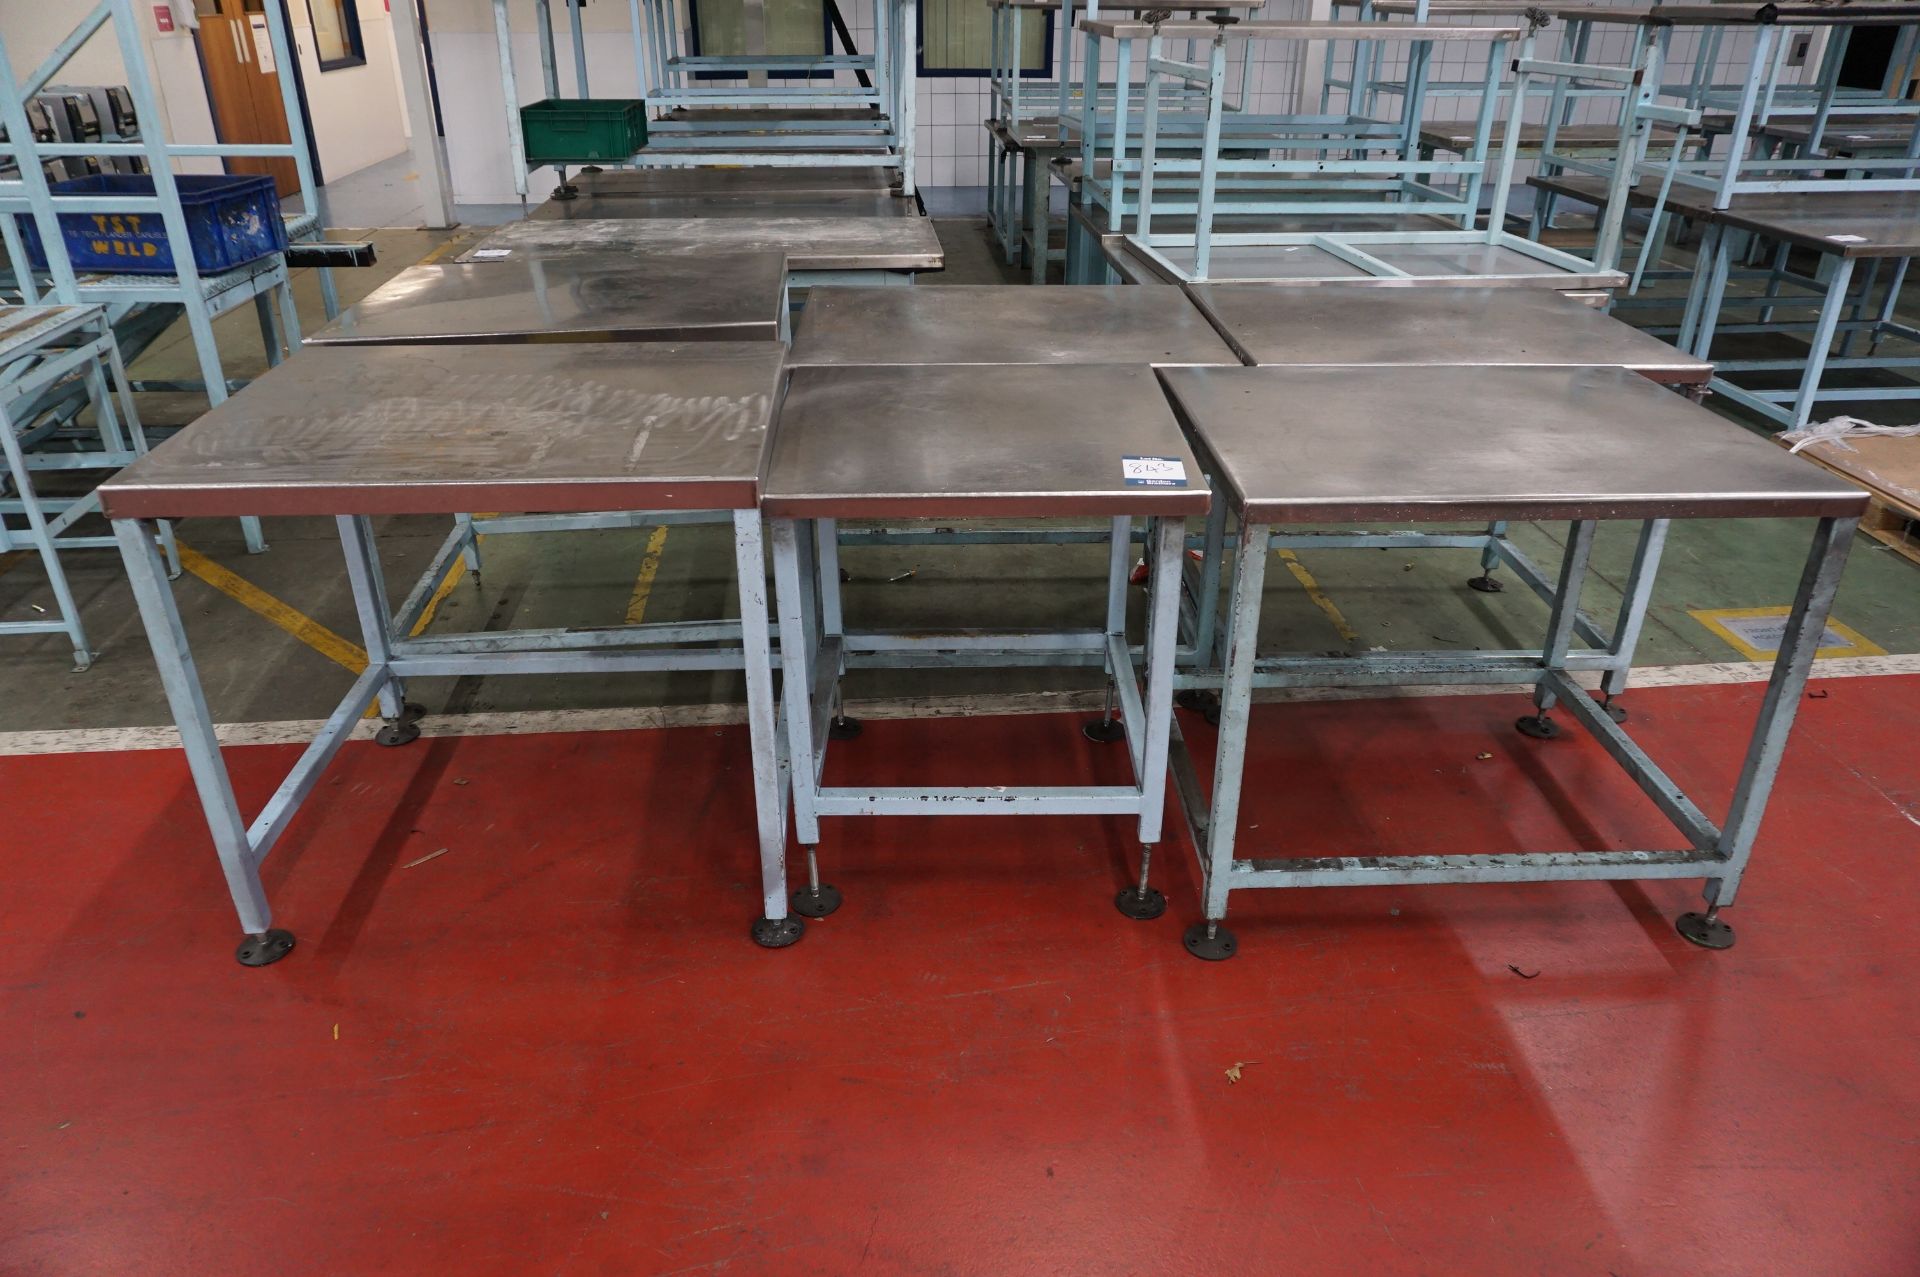 6 x Steel topped workbenches of various length and height